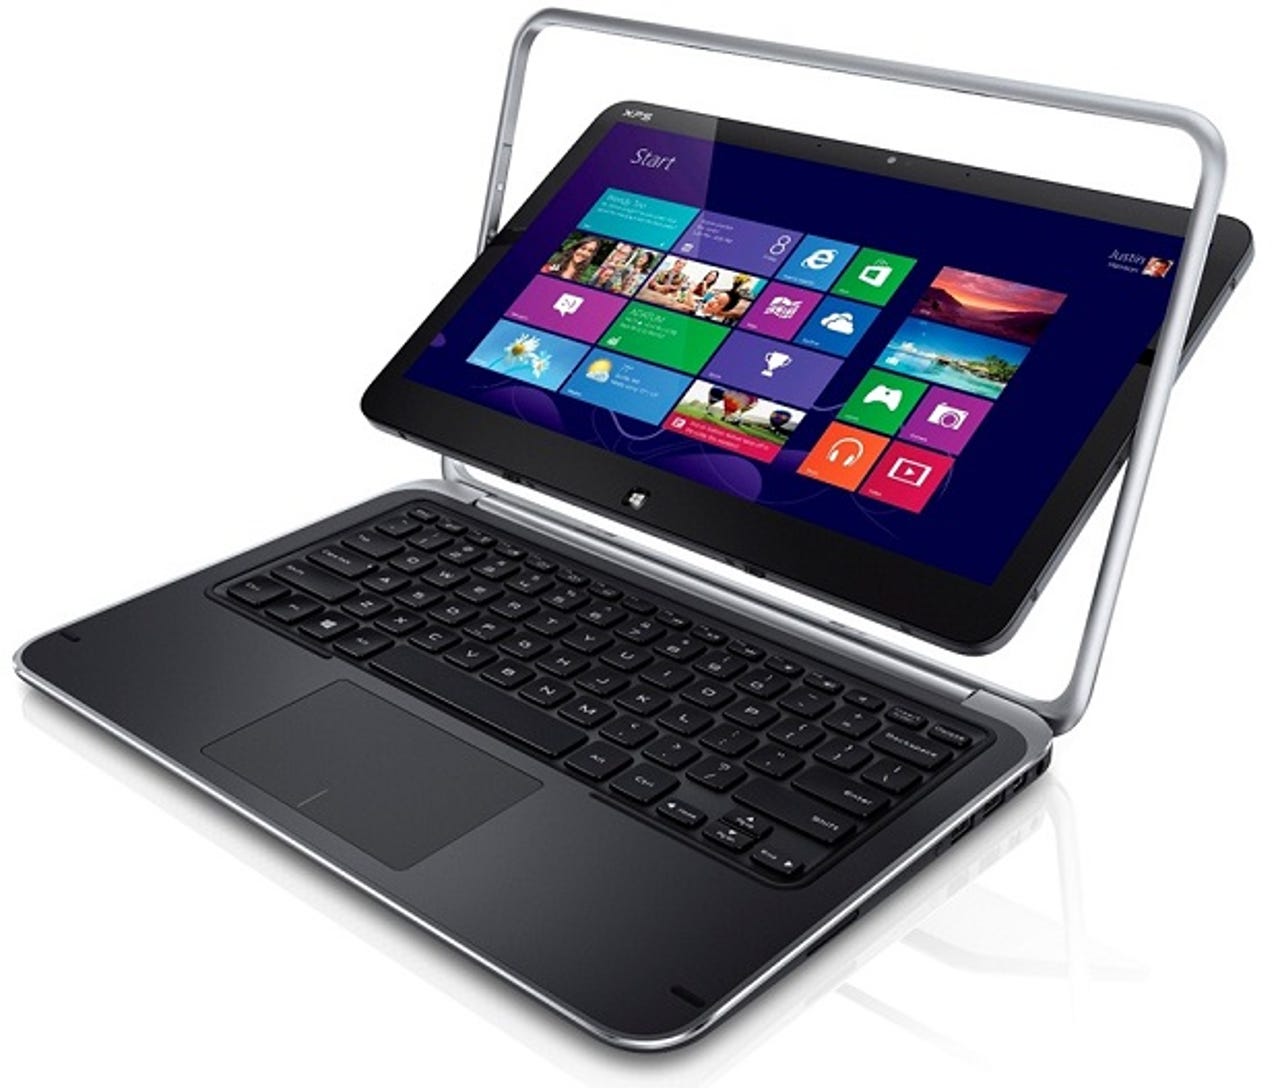 dell-XPS-Duo-12-touch-ultrabook-convertible-laptop-tablet-windows-8